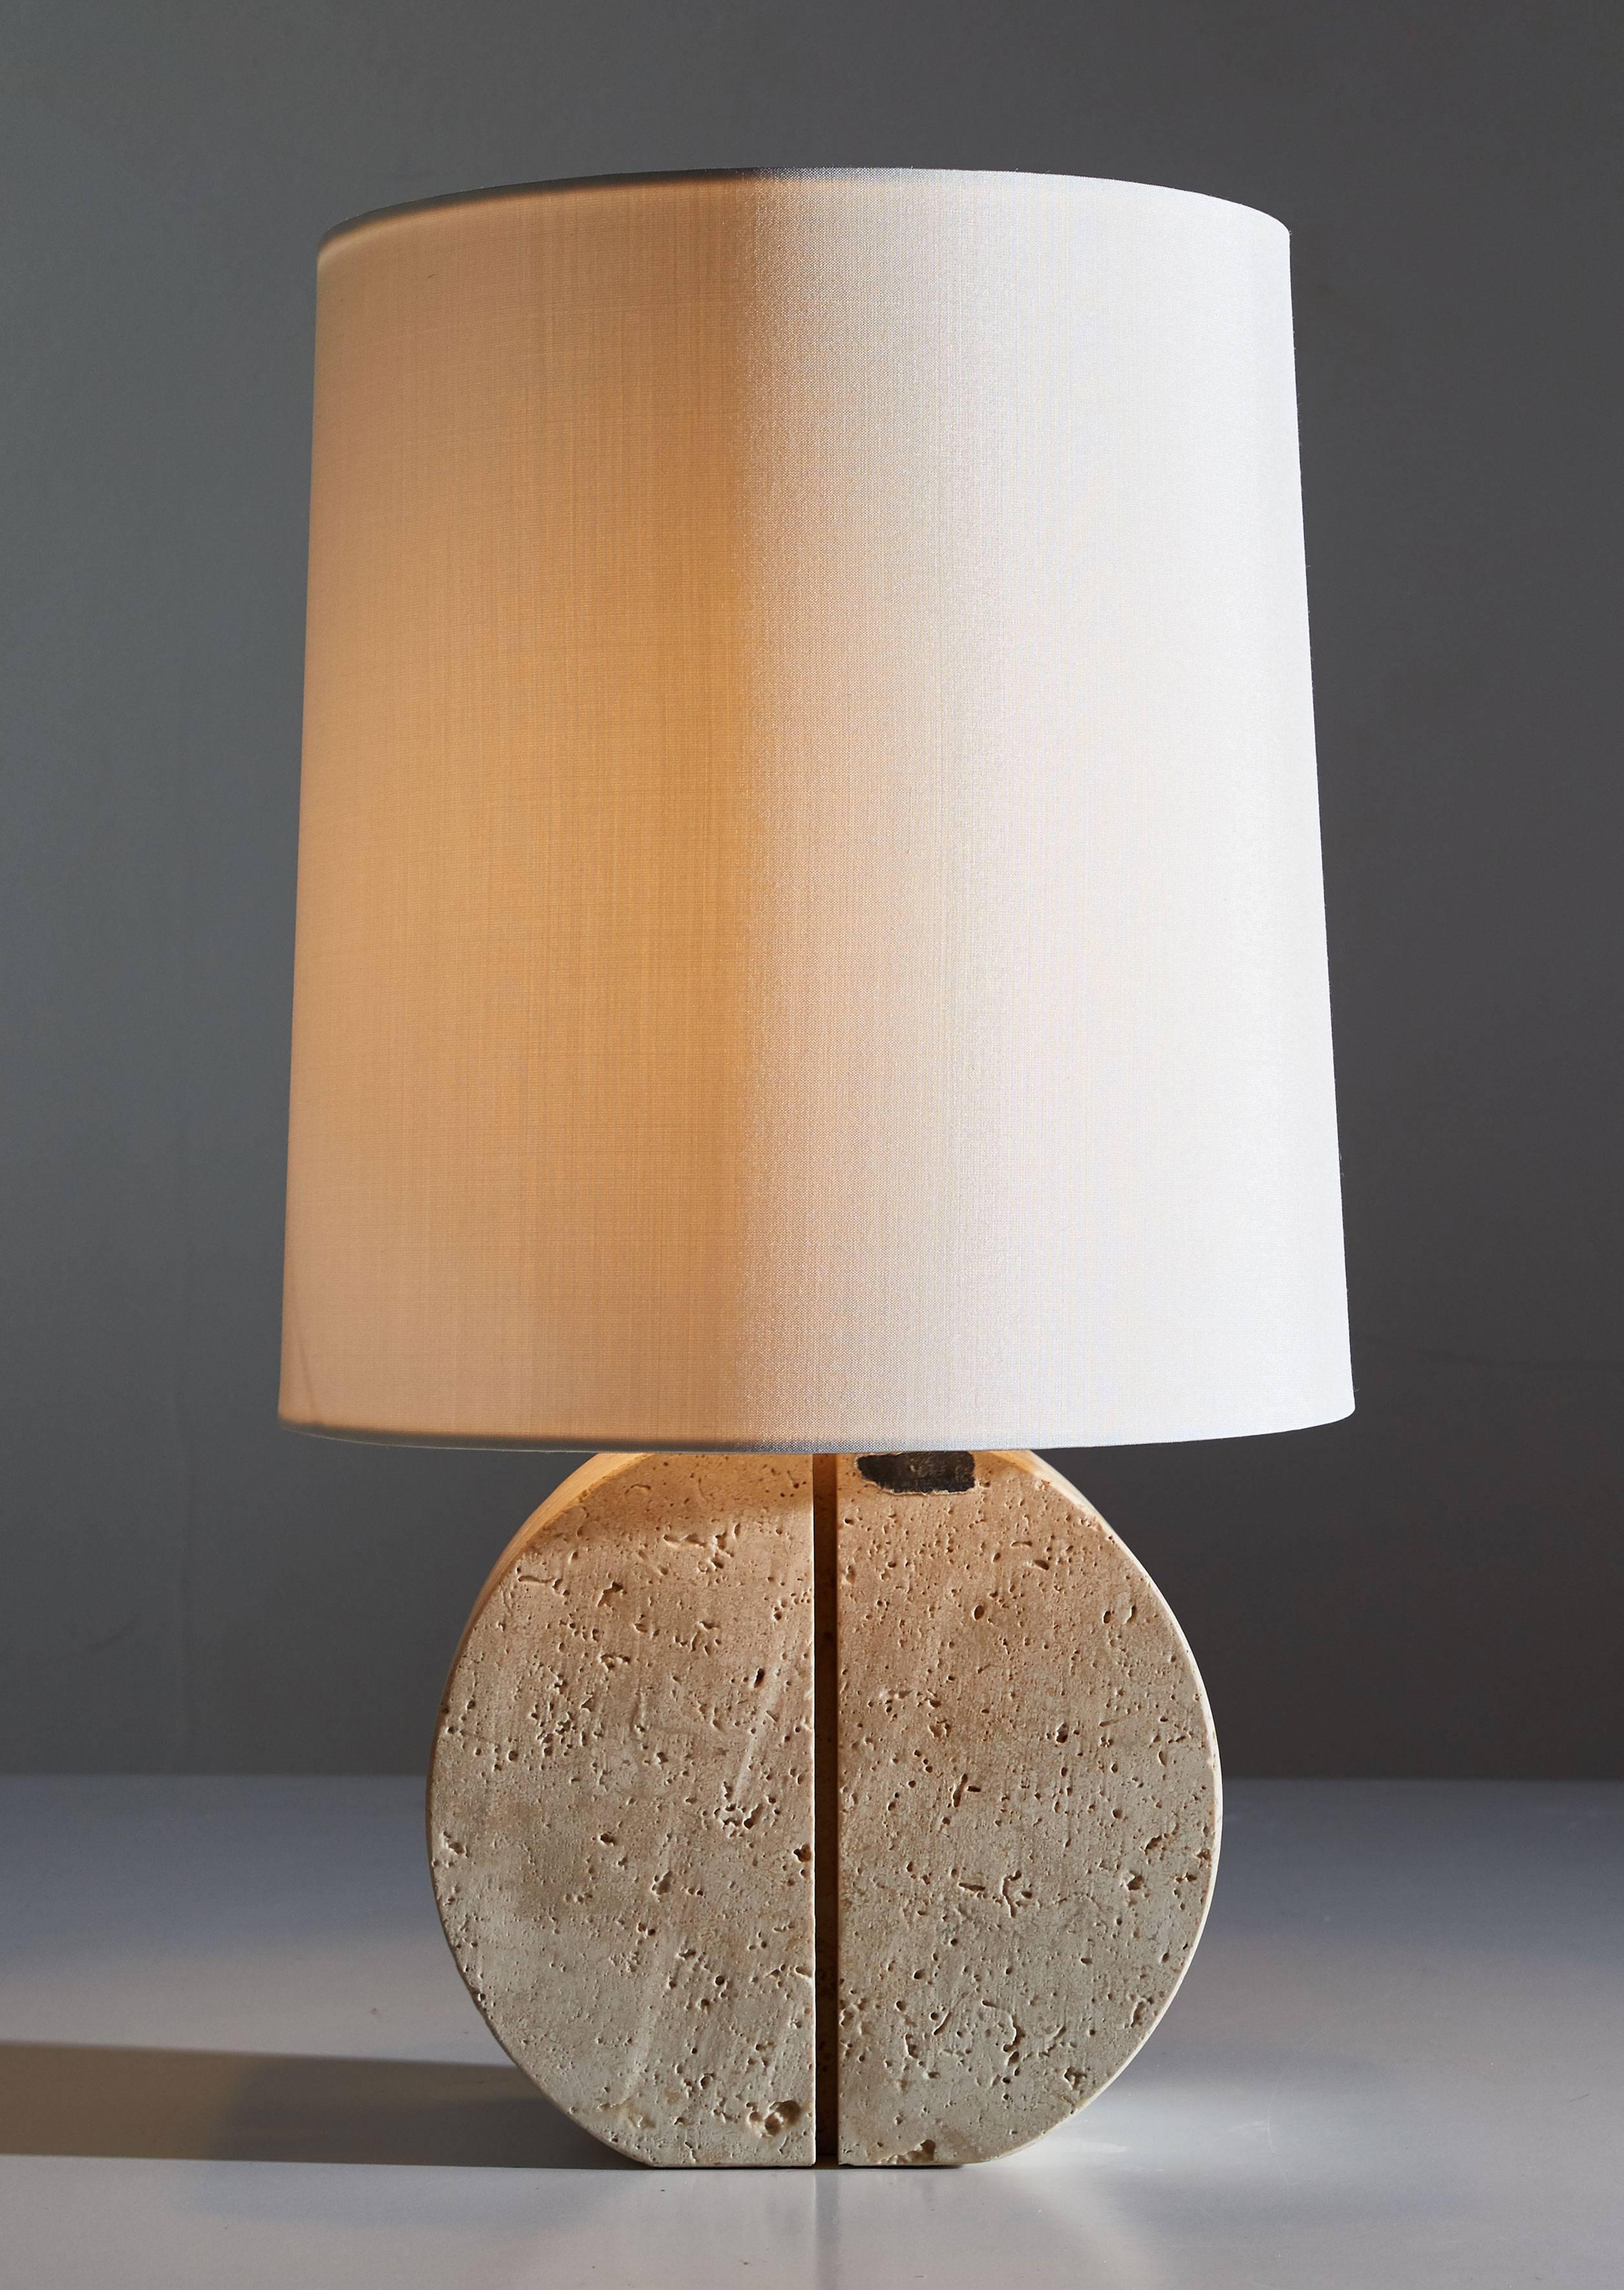 Travertine table lamp designed in Italy, circa 1970s. Linear carving to front and sides of travertine. Custom silk shade. Original cords. Maintains original label. Takes one E27 75w maximum bulb